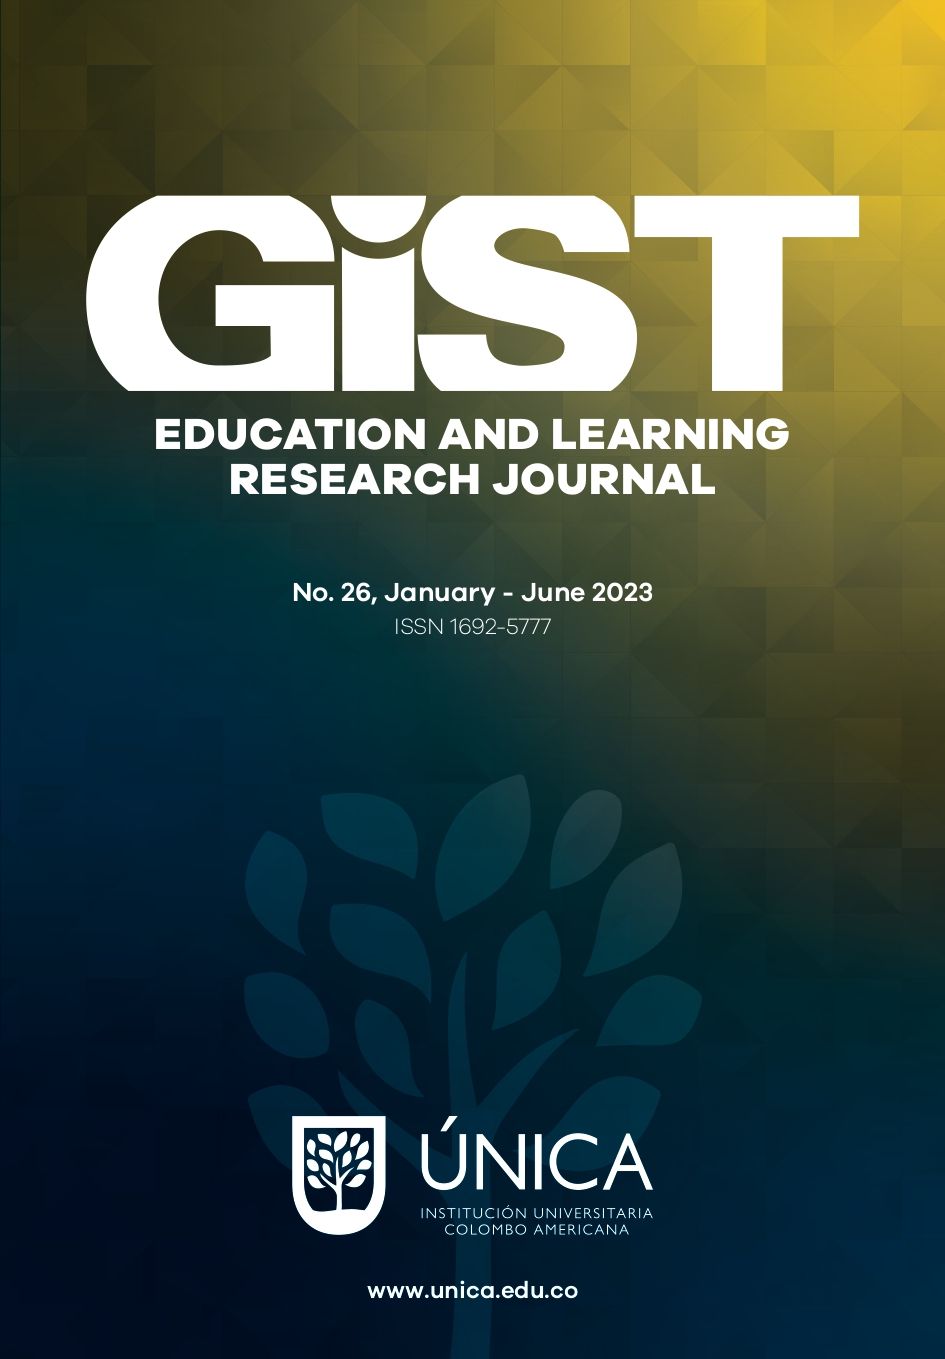 					View Vol. 26 (2023): GiST Education and Learning Research Journal, No 26
				